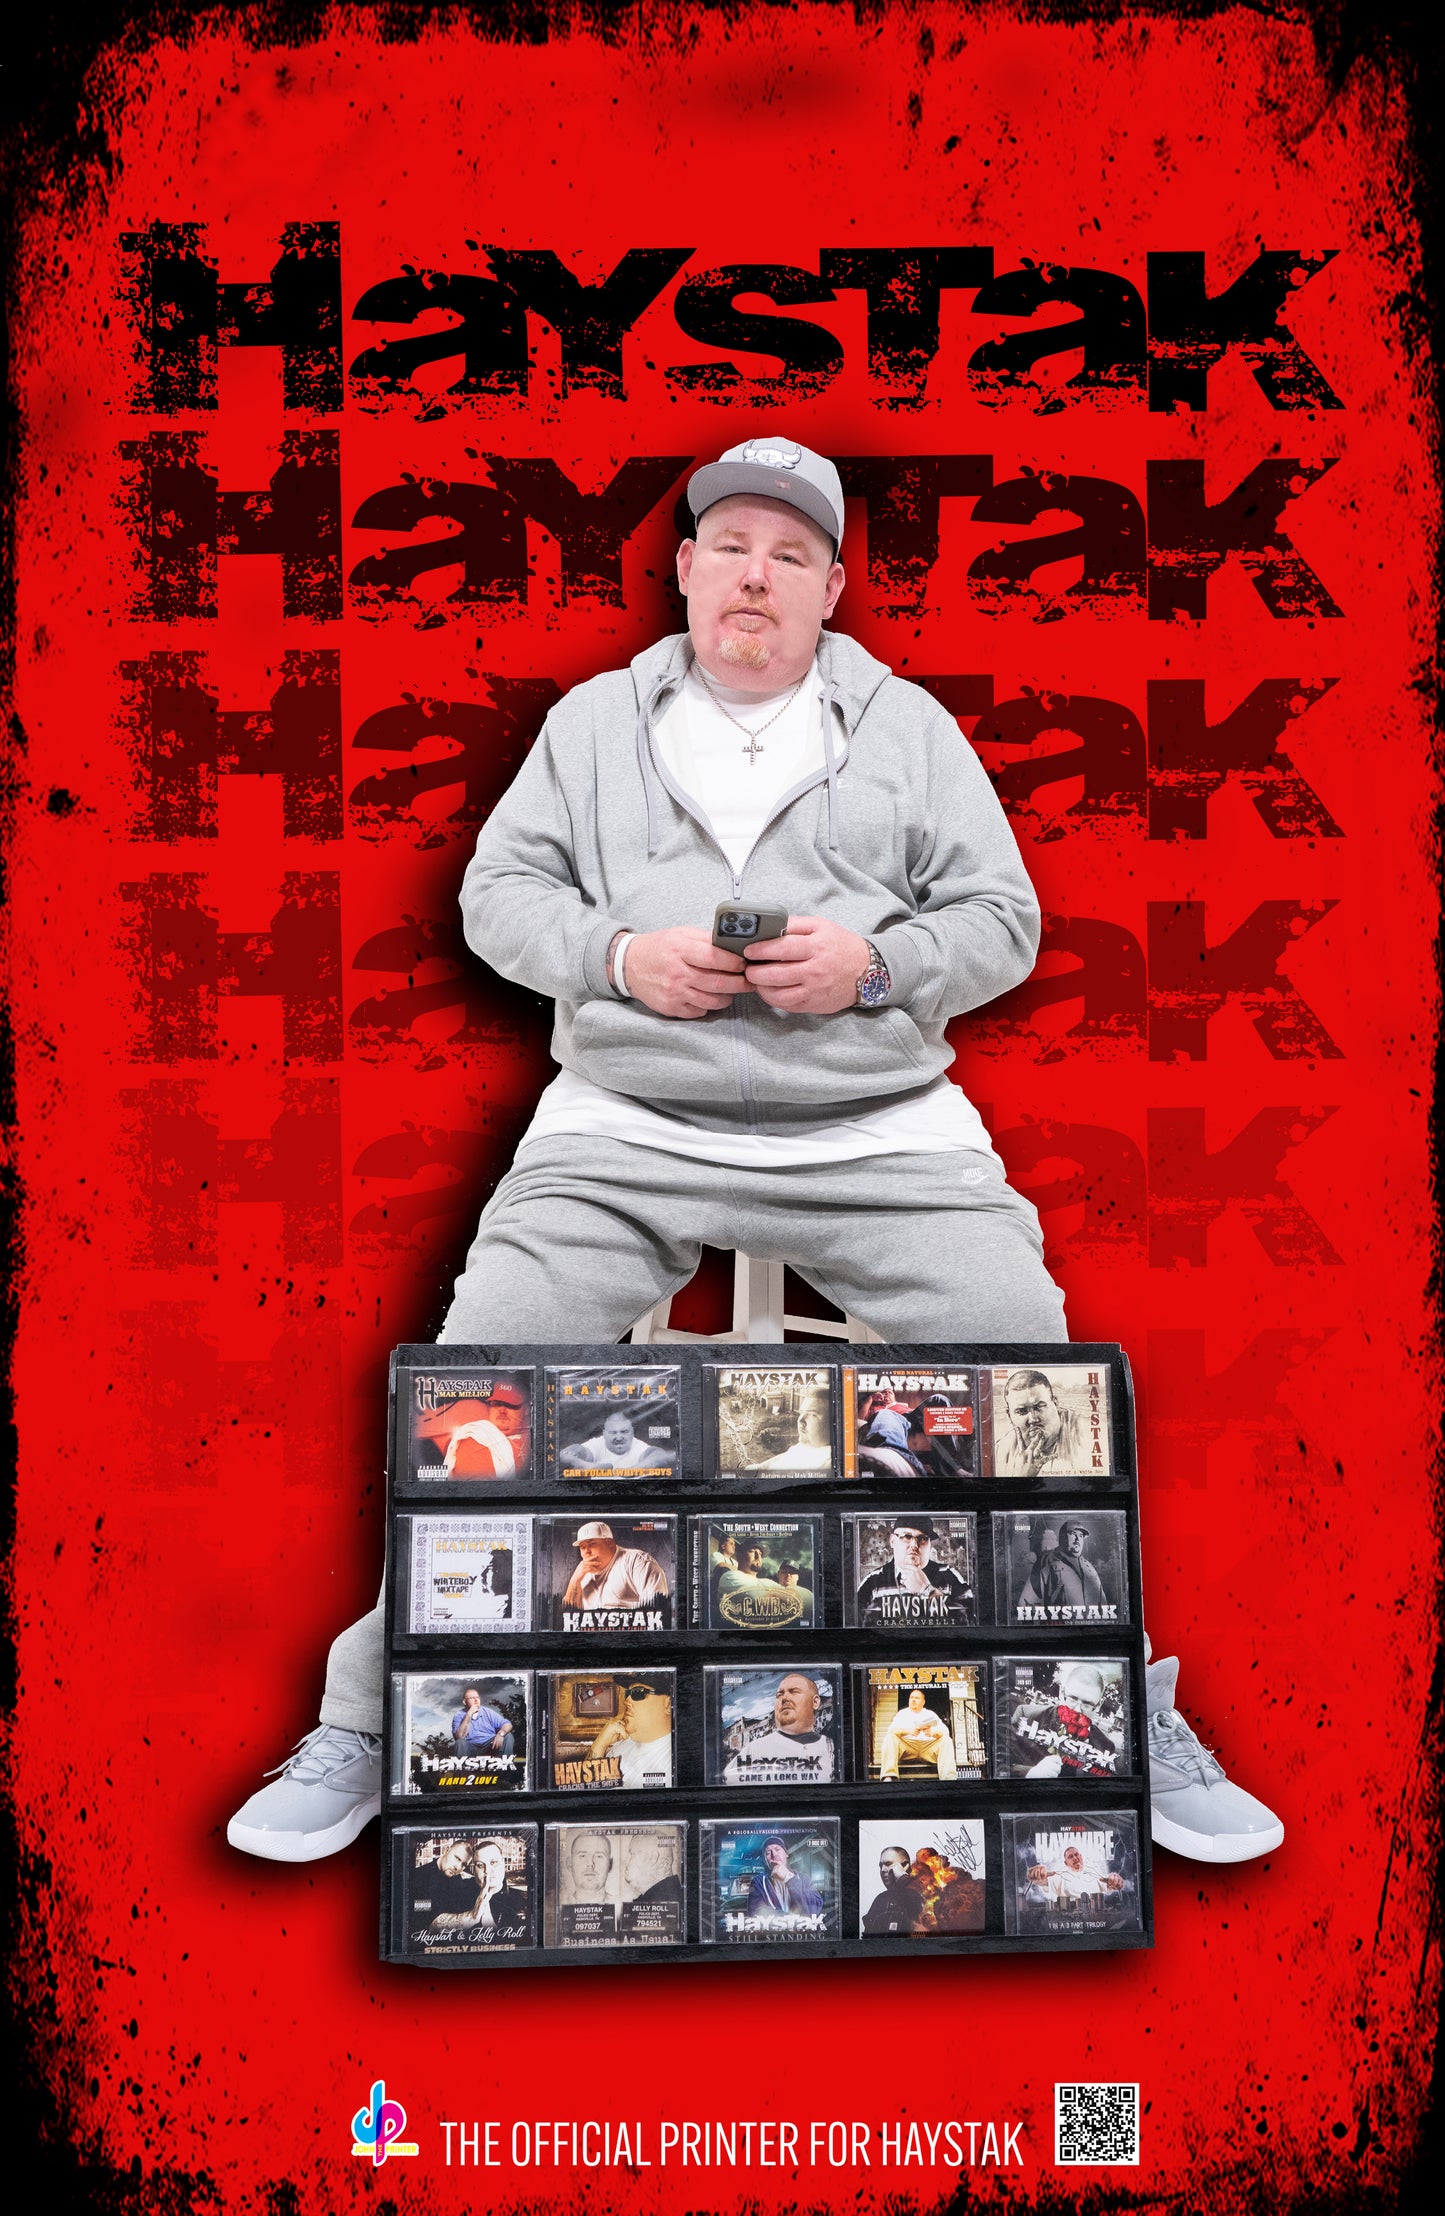 Haystak Autographed 11x17 Poster (red)